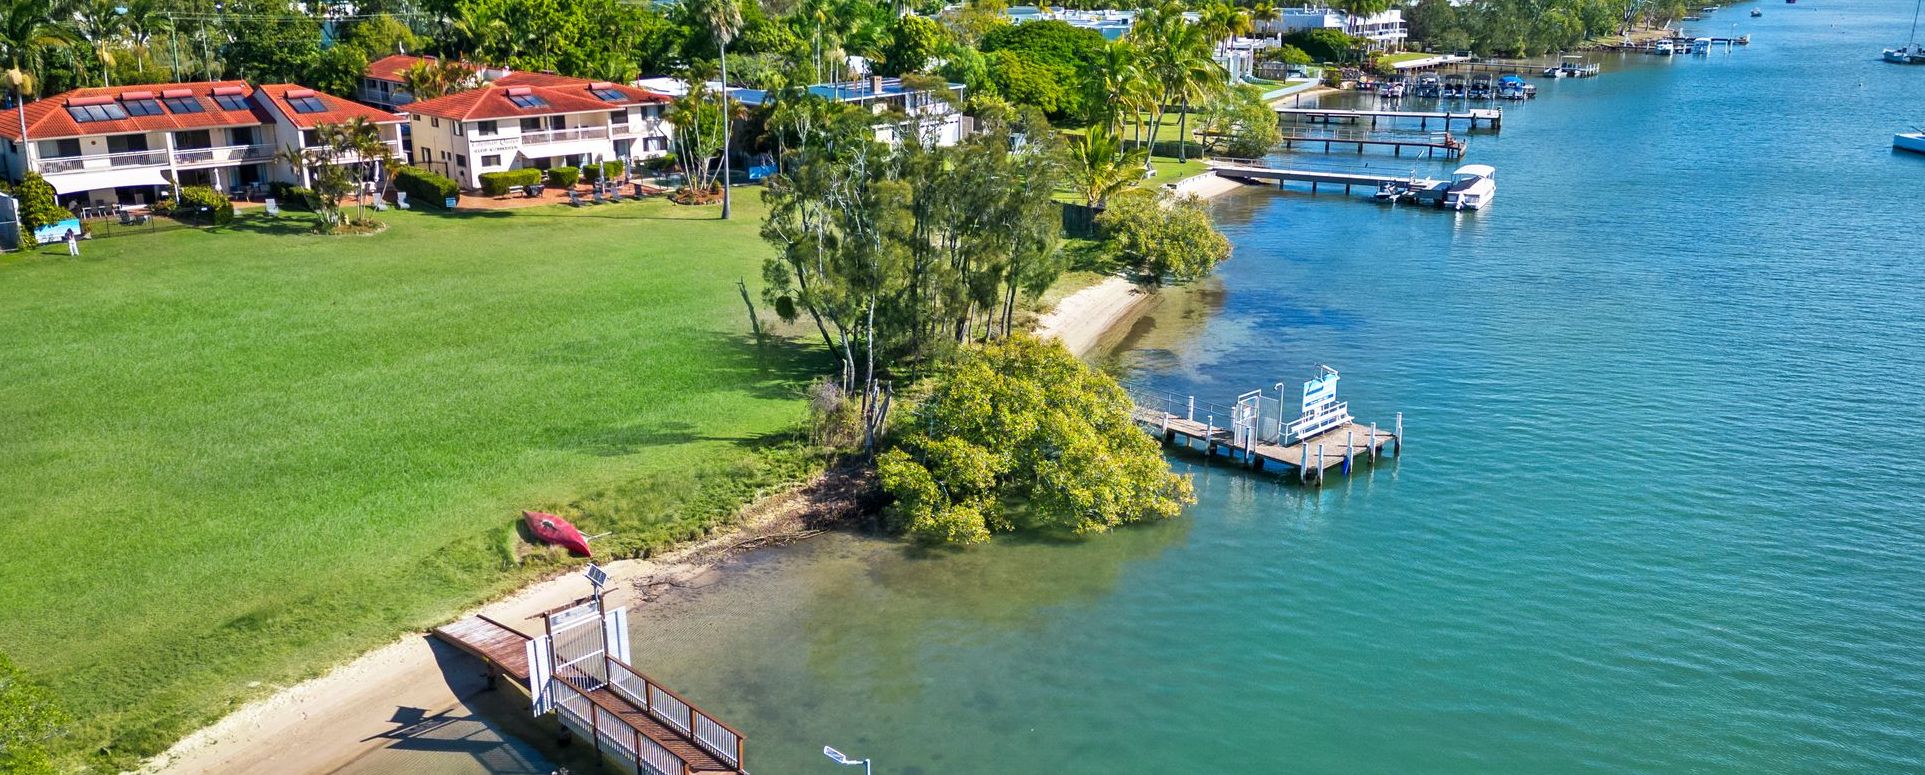 Value For Money Noosa Riverfront Accommodation